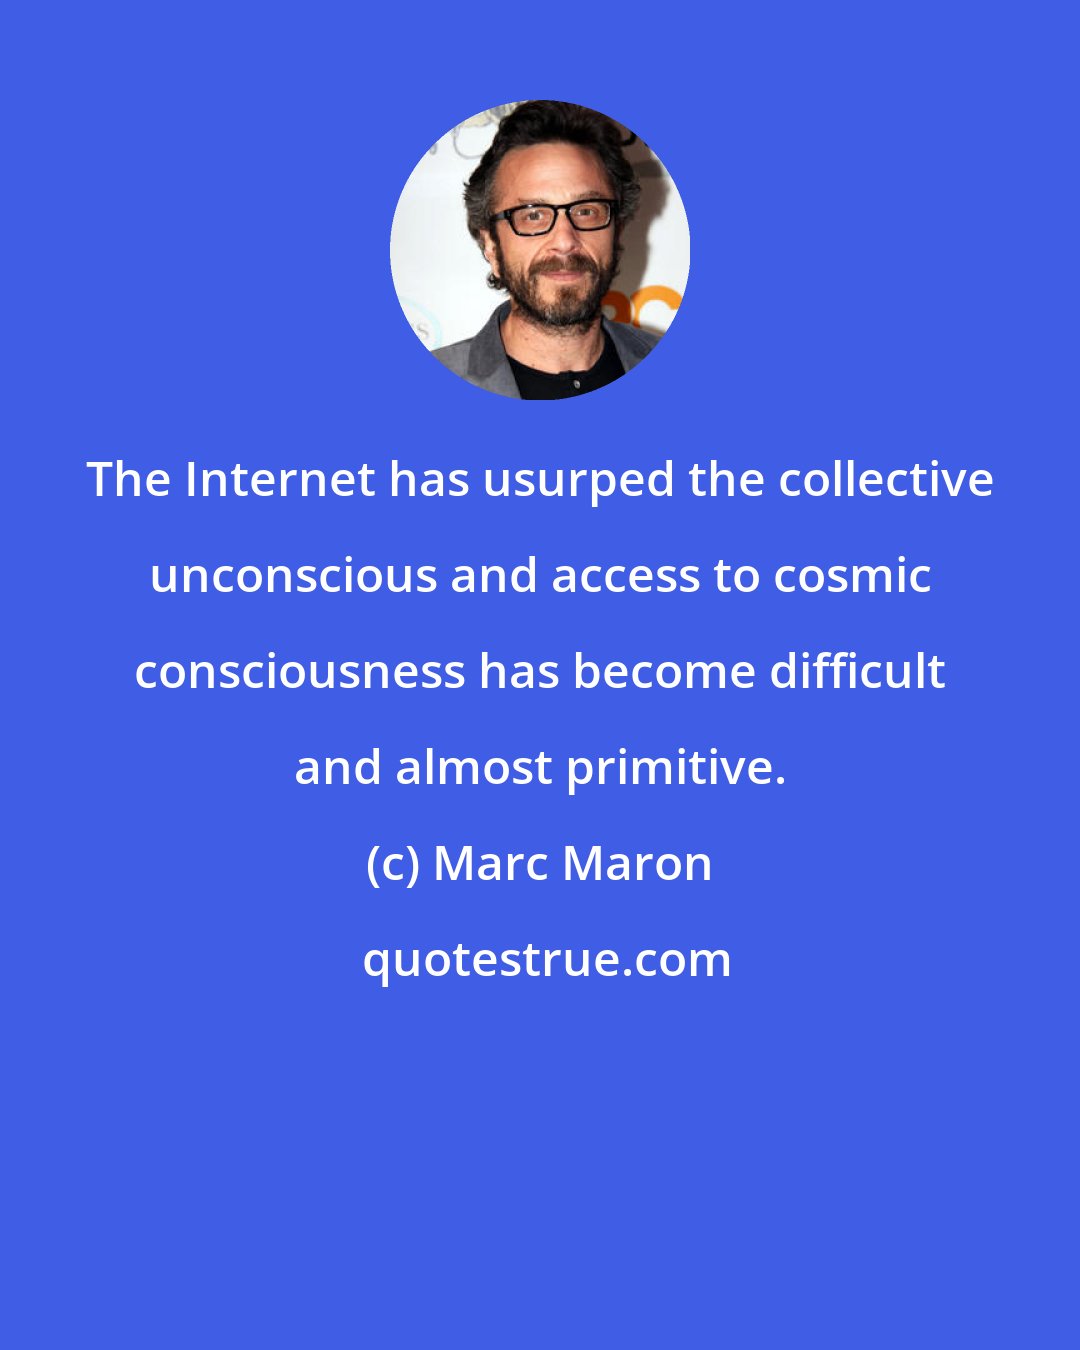 Marc Maron: The Internet has usurped the collective unconscious and access to cosmic consciousness has become difficult and almost primitive.